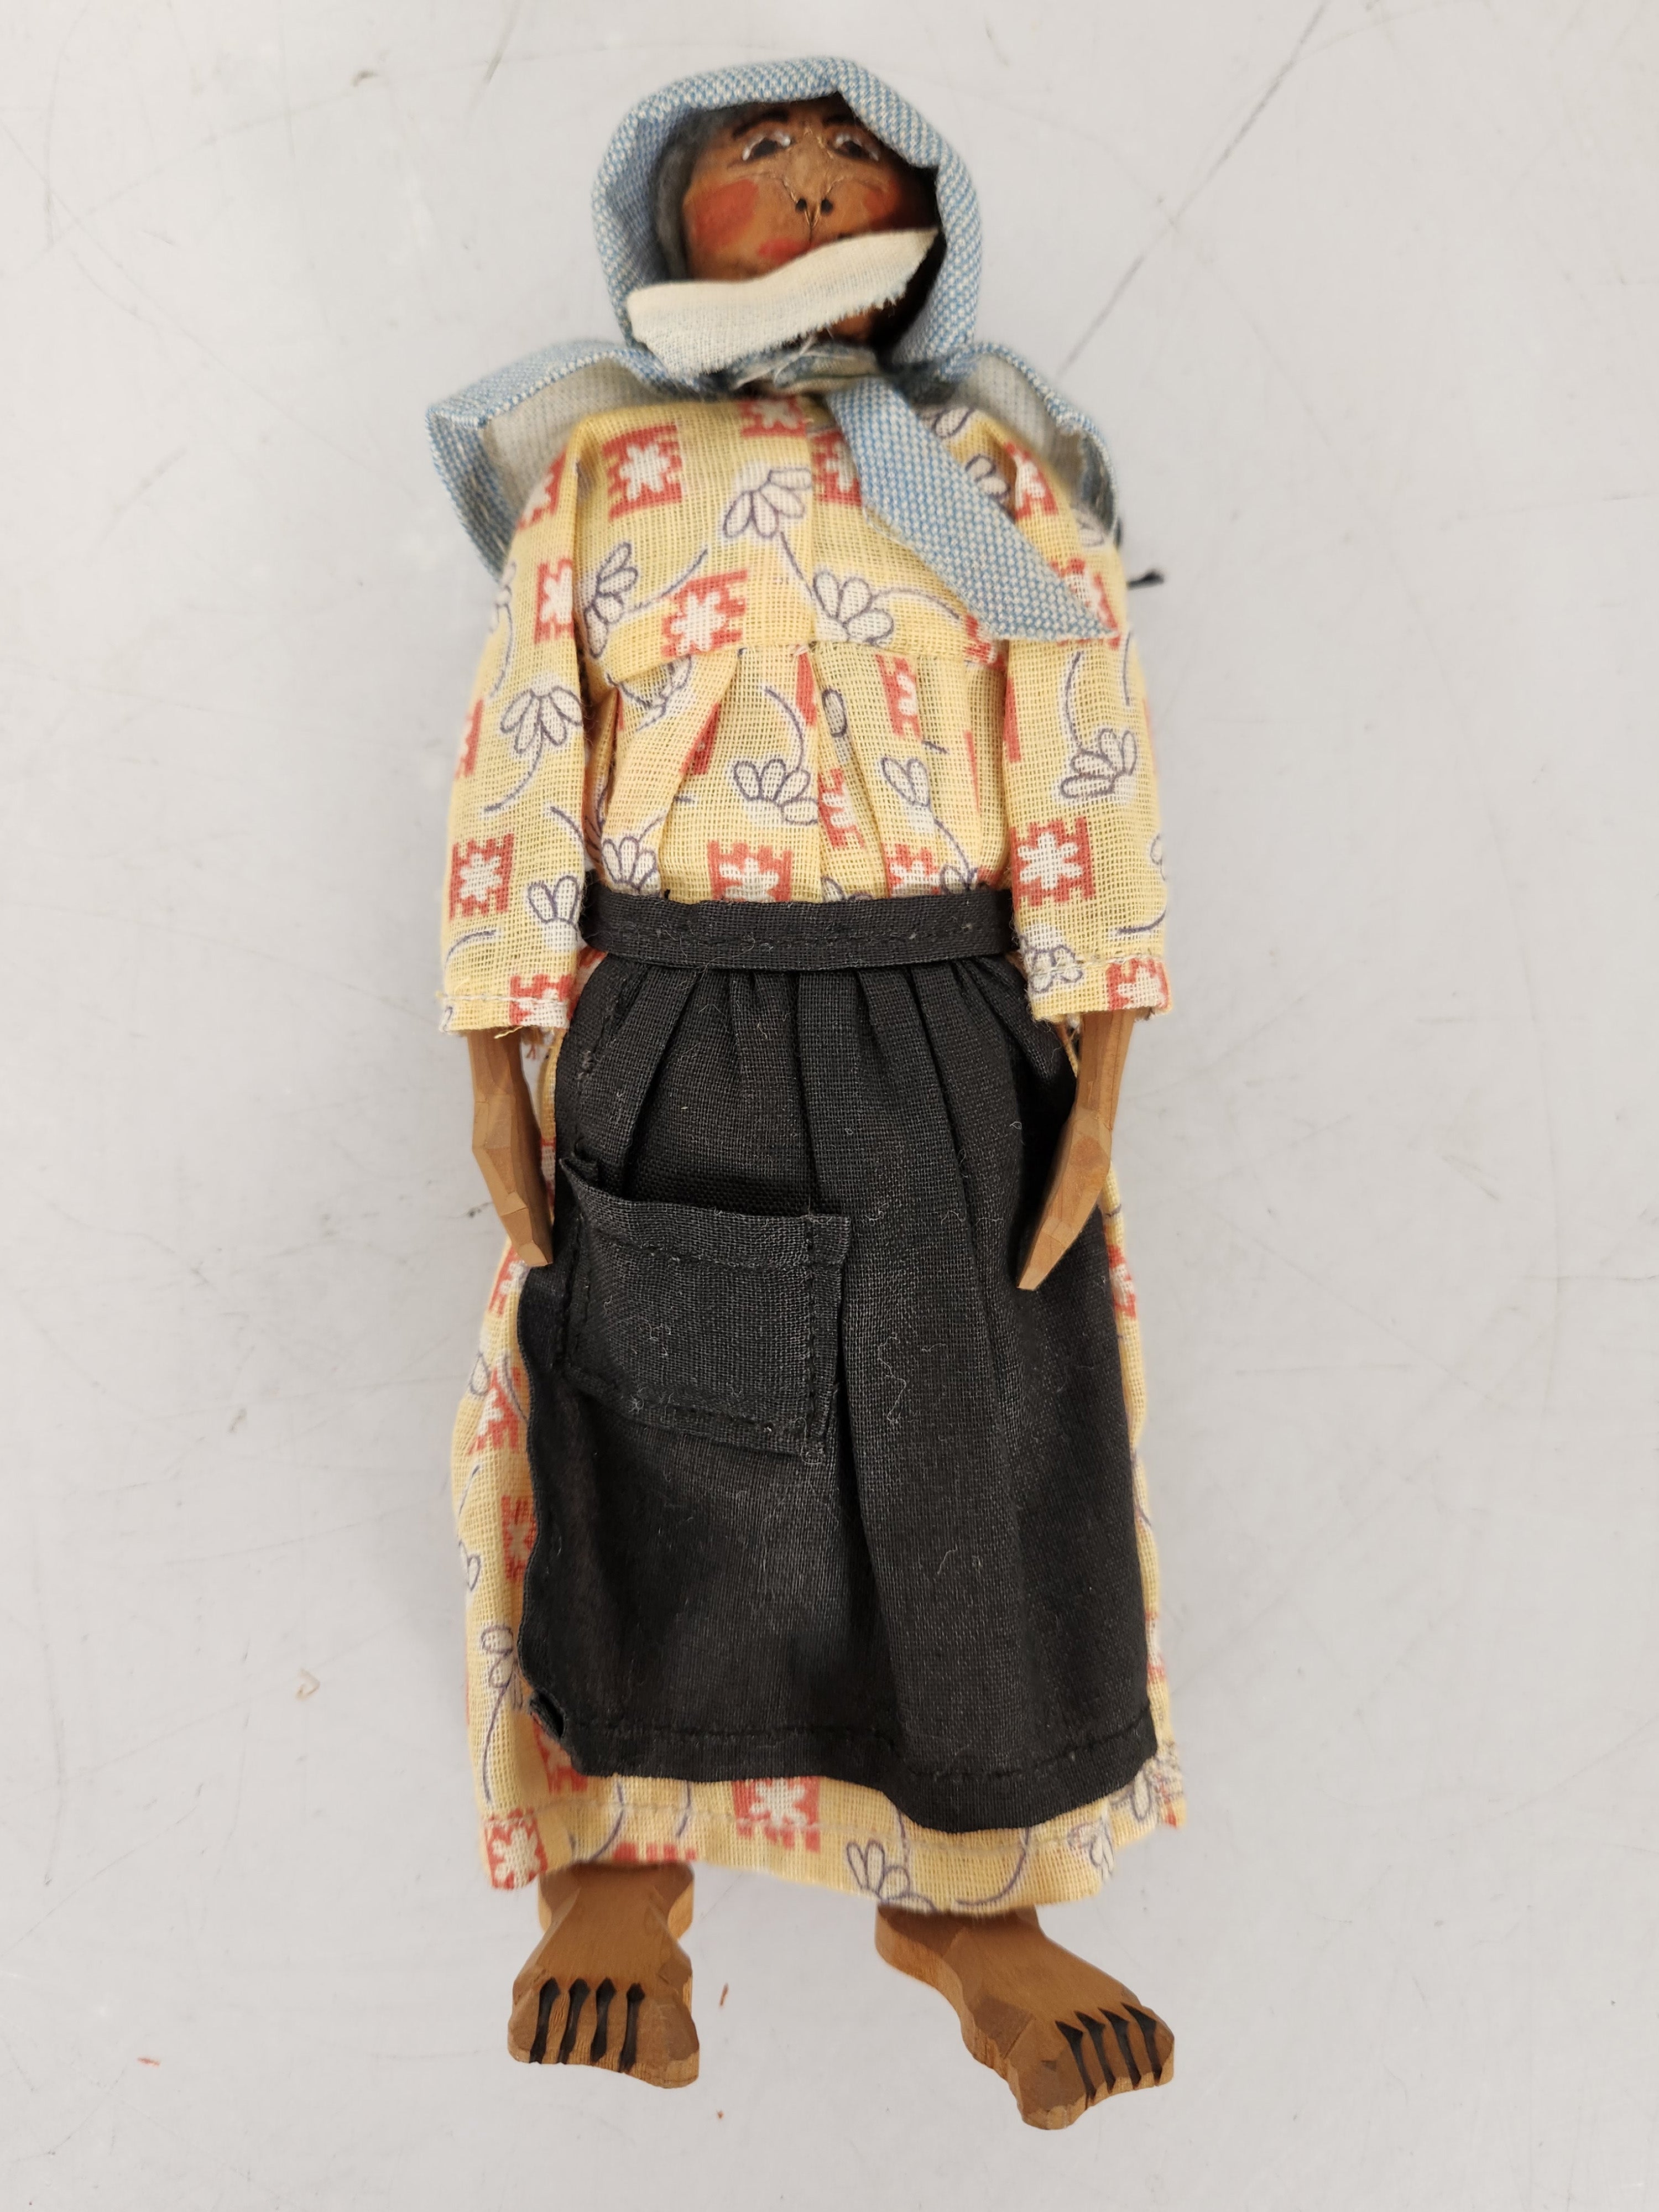 Handcarved Wooden Doll